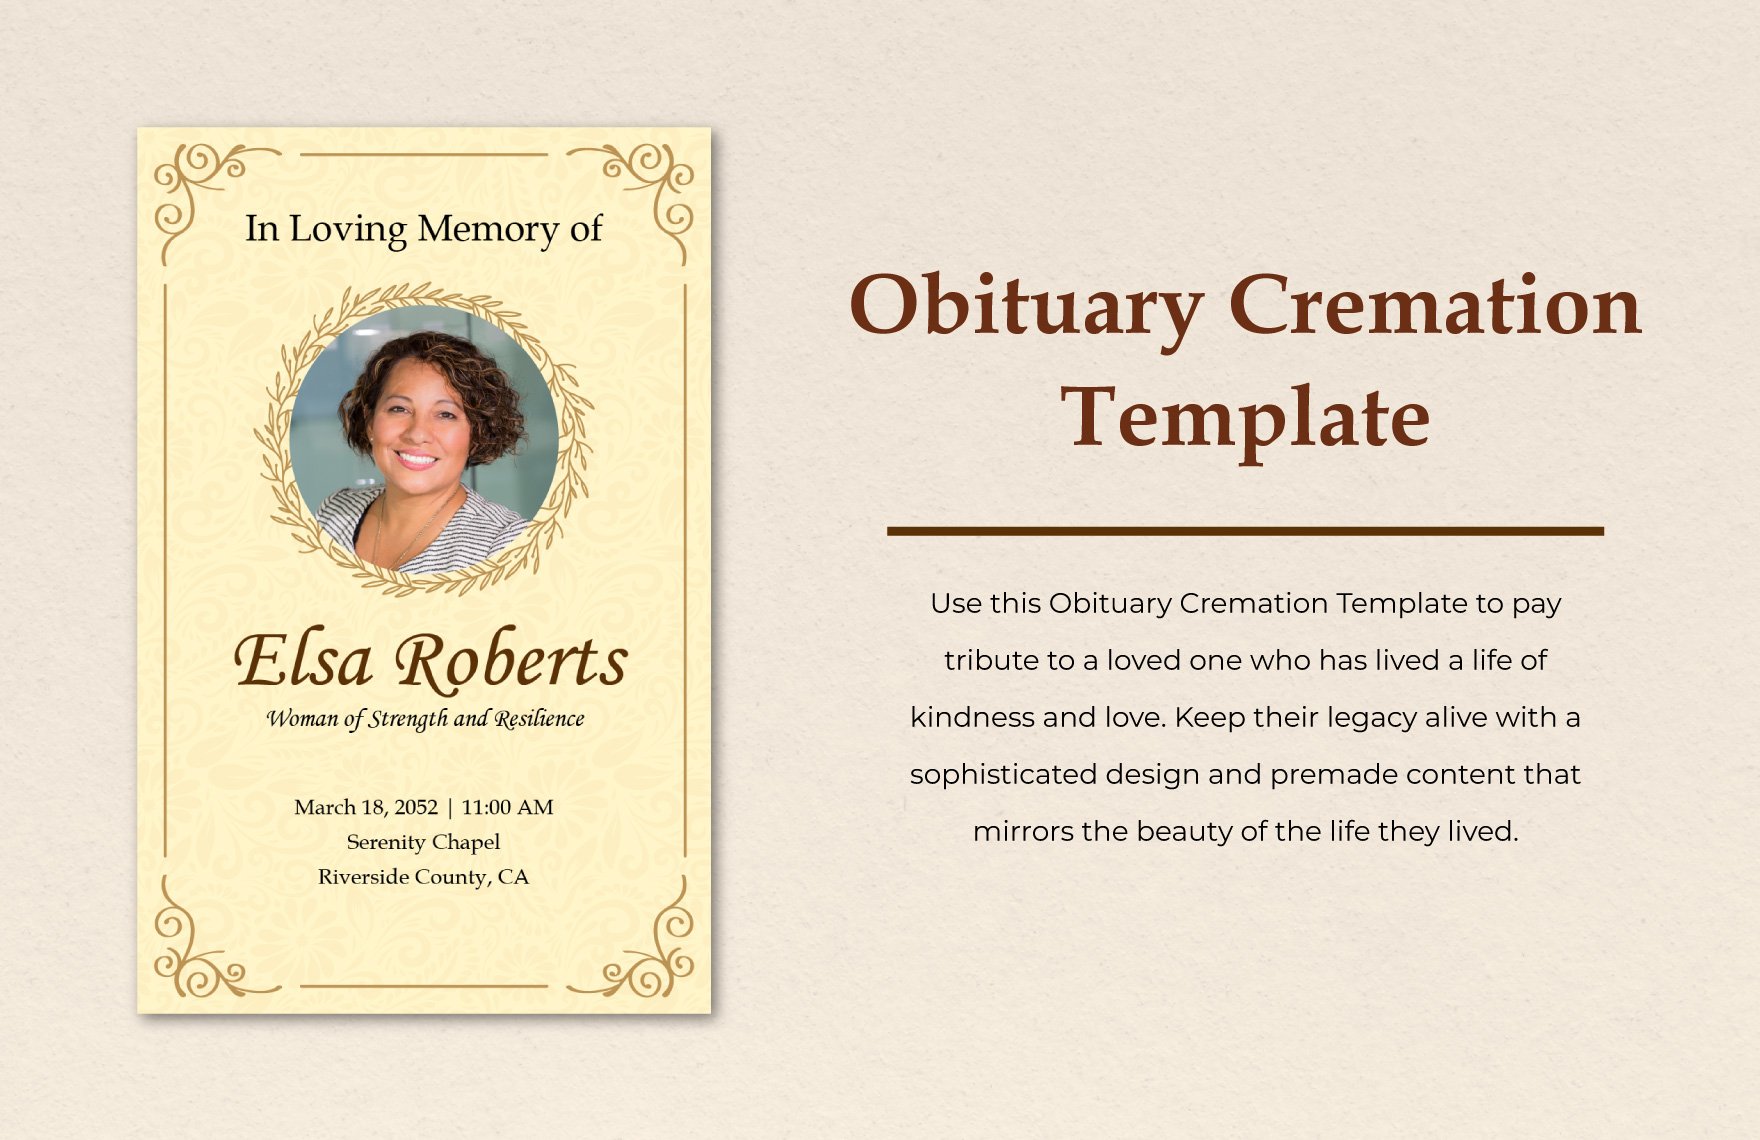 Obituary Cremation Template